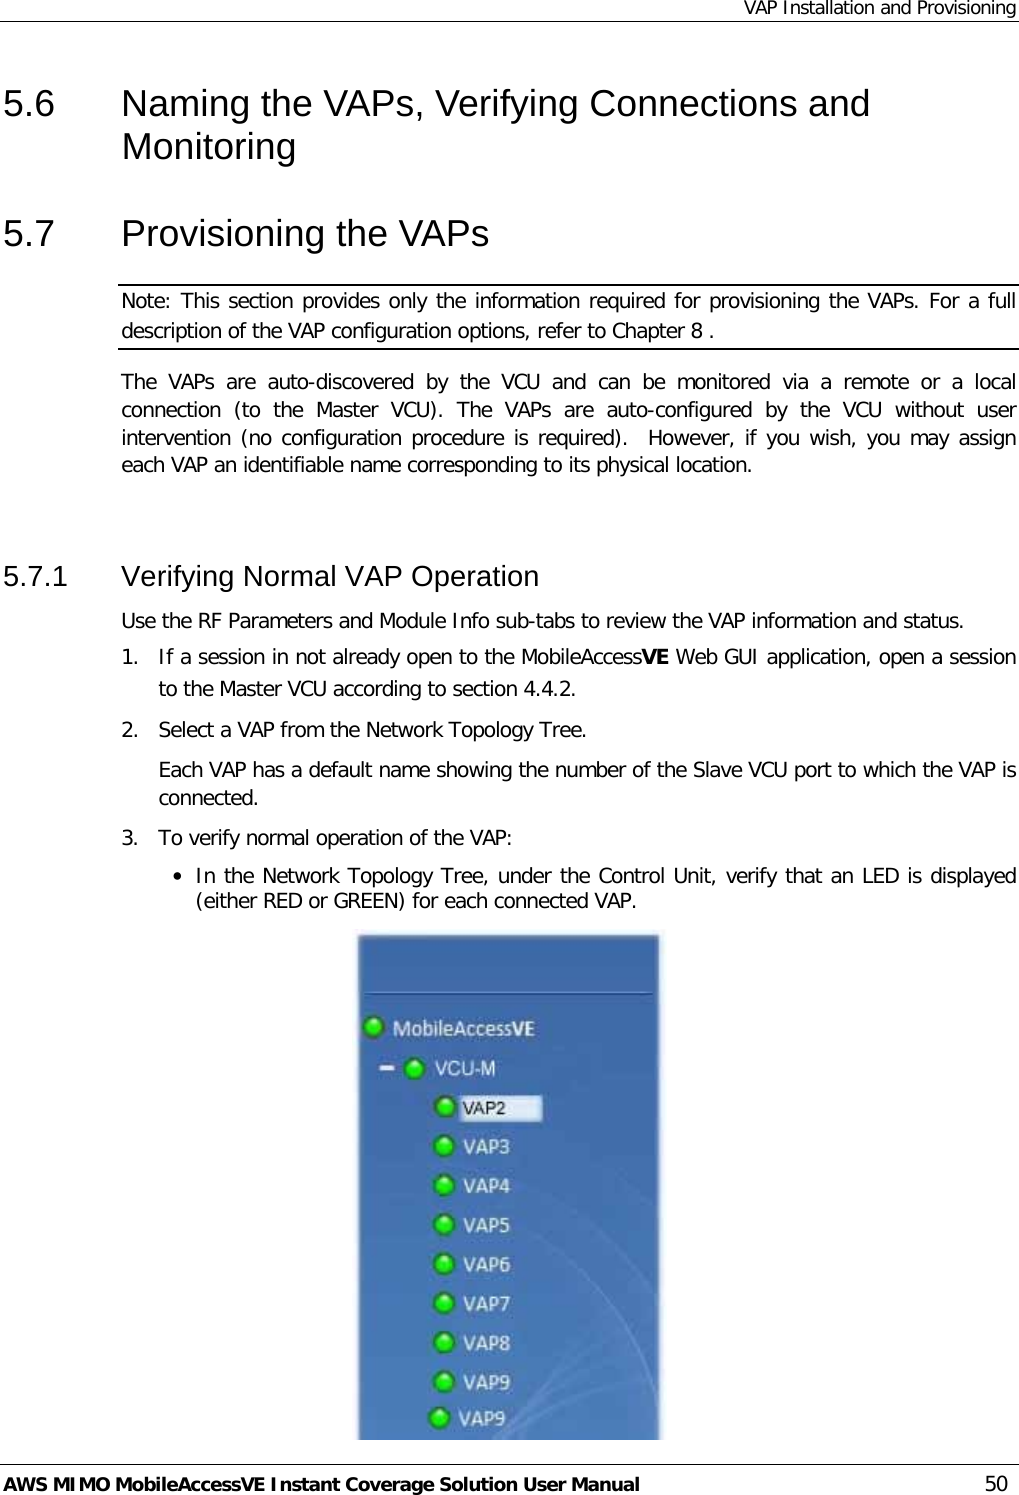 VAP Installation and Provisioning AWS MIMO MobileAccessVE Instant Coverage Solution User Manual  50 5.6  Naming the VAPs, Verifying Connections and Monitoring 5.7  Provisioning the VAPs Note: This section provides only the information required for provisioning the VAPs. For a full description of the VAP configuration options, refer to Chapter  8 . The  VAPs  are auto-discovered by the VCU  and can be monitored via a  remote  or a local connection  (to the Master VCU).  The  VAPs  are auto-configured by the VCU without user intervention (no configuration procedure is required).  However, if you wish, you may assign each VAP an identifiable name corresponding to its physical location.   5.7.1  Verifying Normal VAP Operation Use the RF Parameters and Module Info sub-tabs to review the VAP information and status.   1.  If a session in not already open to the MobileAccessVE Web GUI application, open a session to the Master VCU according to section  4.4.2. 2.  Select a VAP from the Network Topology Tree.   Each VAP has a default name showing the number of the Slave VCU port to which the VAP is connected. 3.  To verify normal operation of the VAP: • In the Network Topology Tree, under the Control Unit, verify that an LED is displayed (either RED or GREEN) for each connected VAP.   